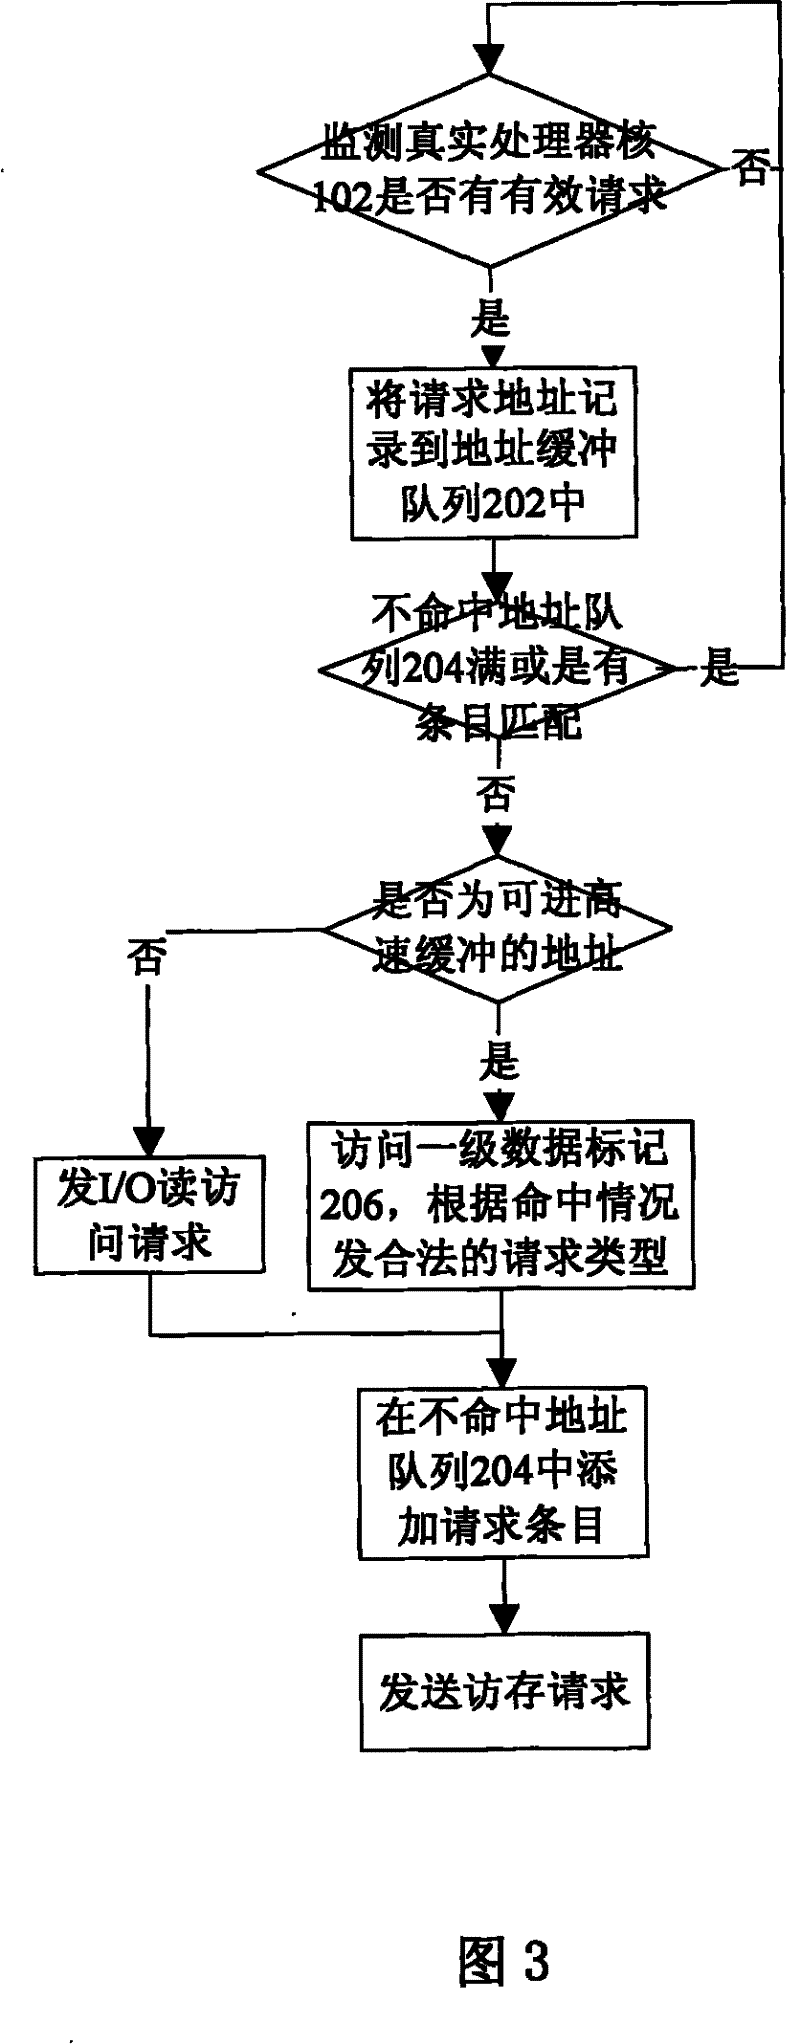 A device for physical verification of multi-core processor cache consistency